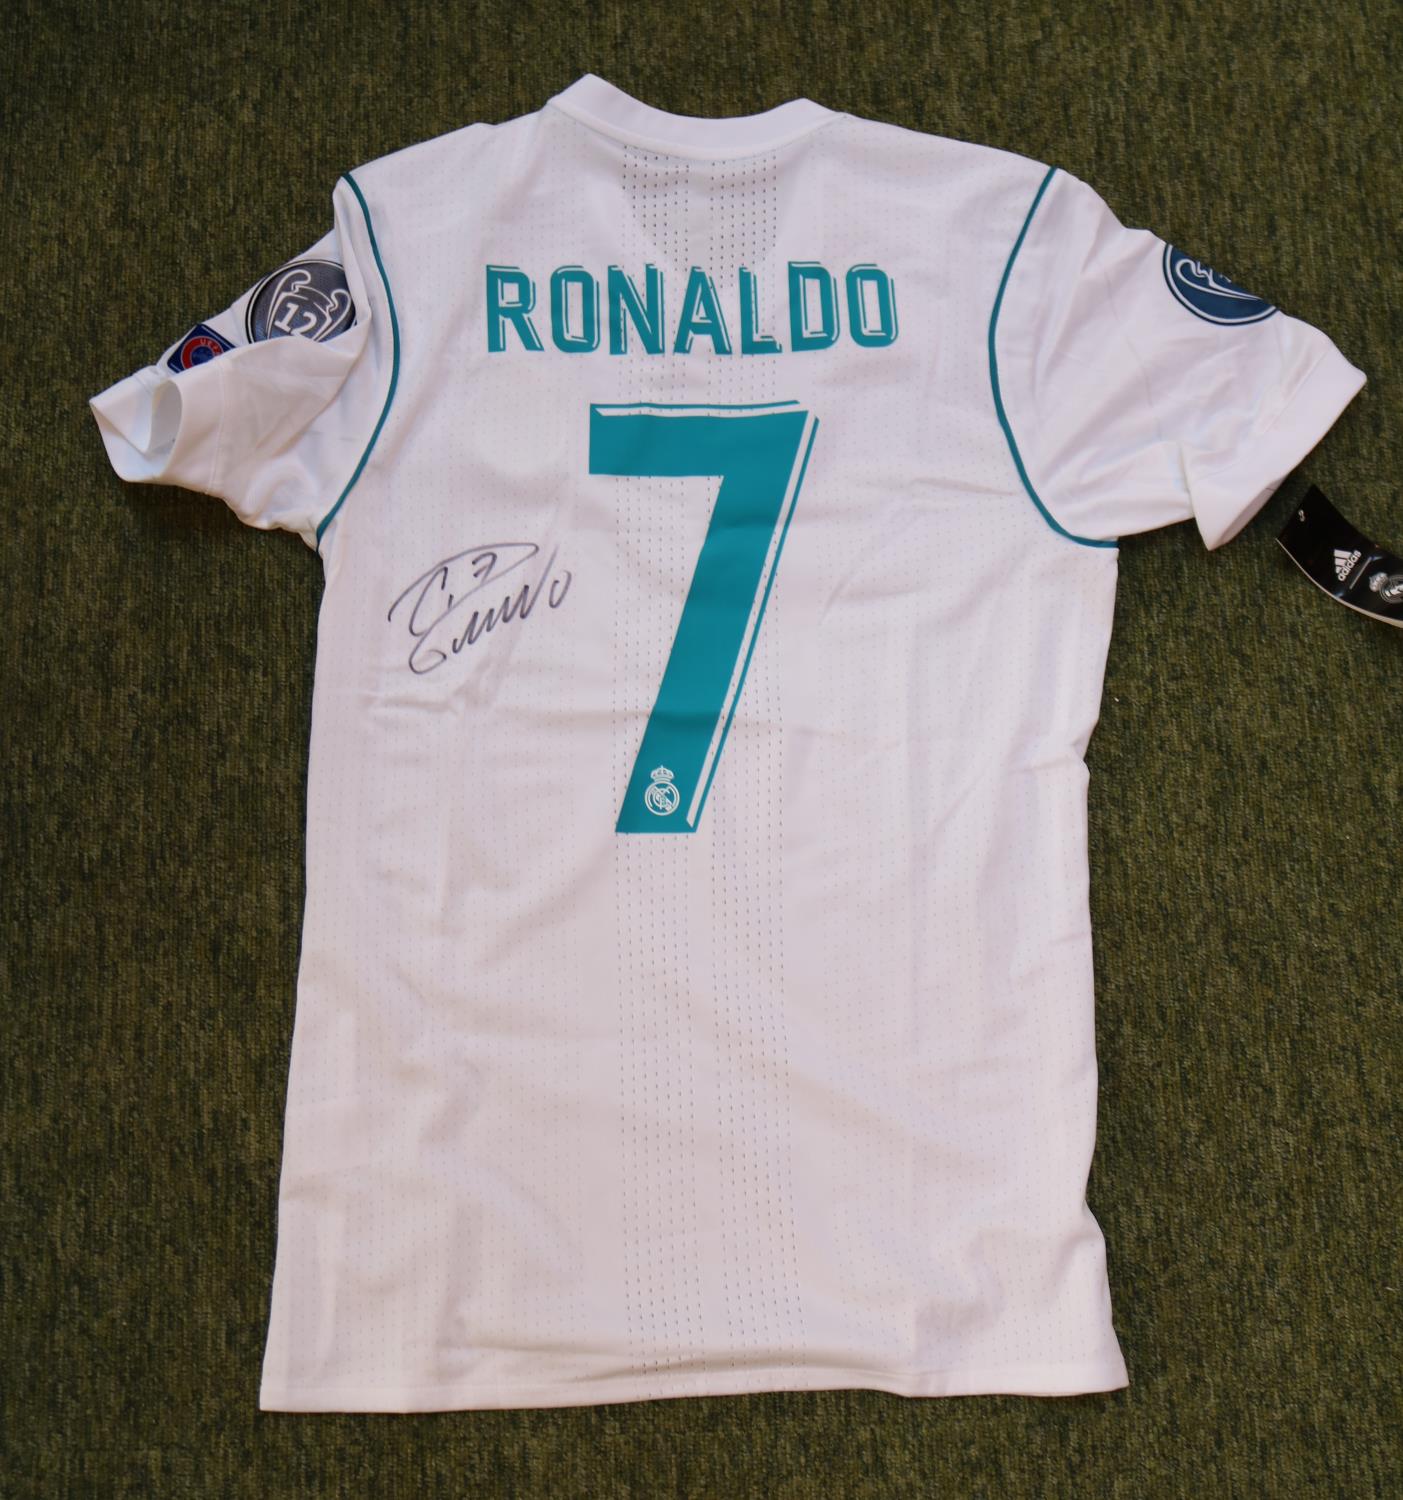 CRISTIANO RONALDO 2018 UEFA CHAMPIONS LEAGUE FINAL SIGNED REAL MADRID #7 JERSEY The jersey is - Image 3 of 5